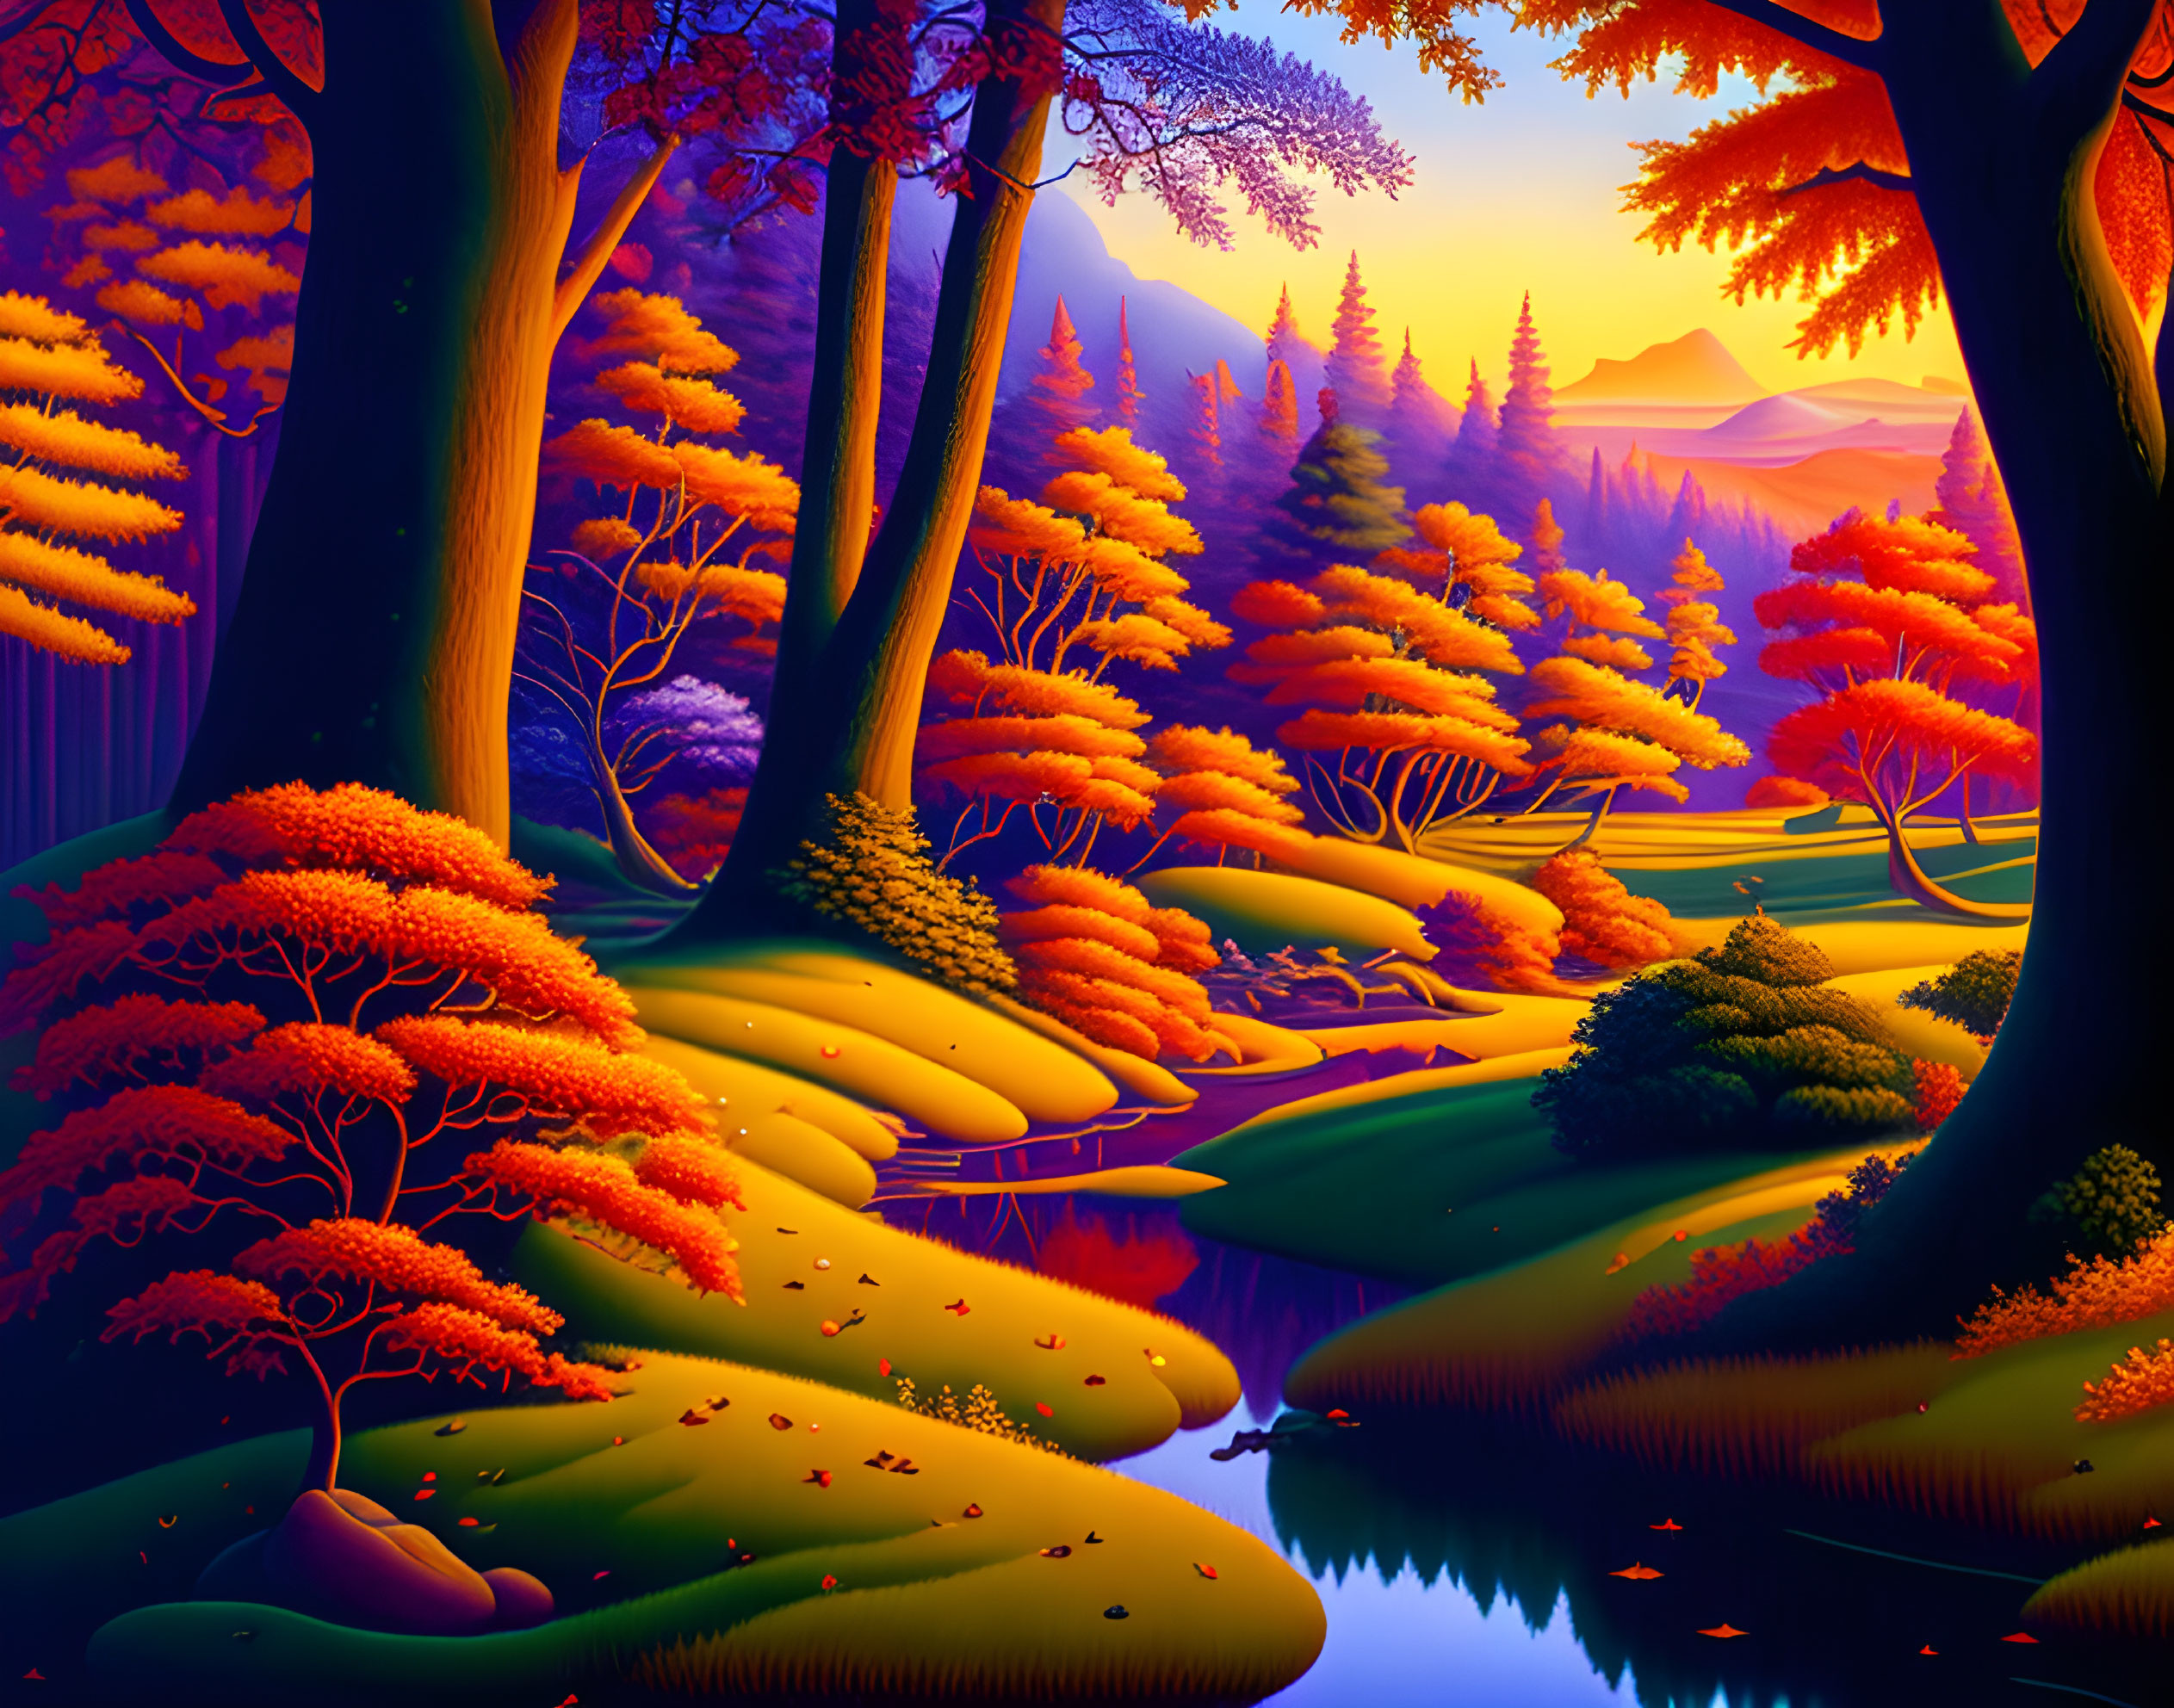 Vibrant autumn forest with serene river and warm sunset glow